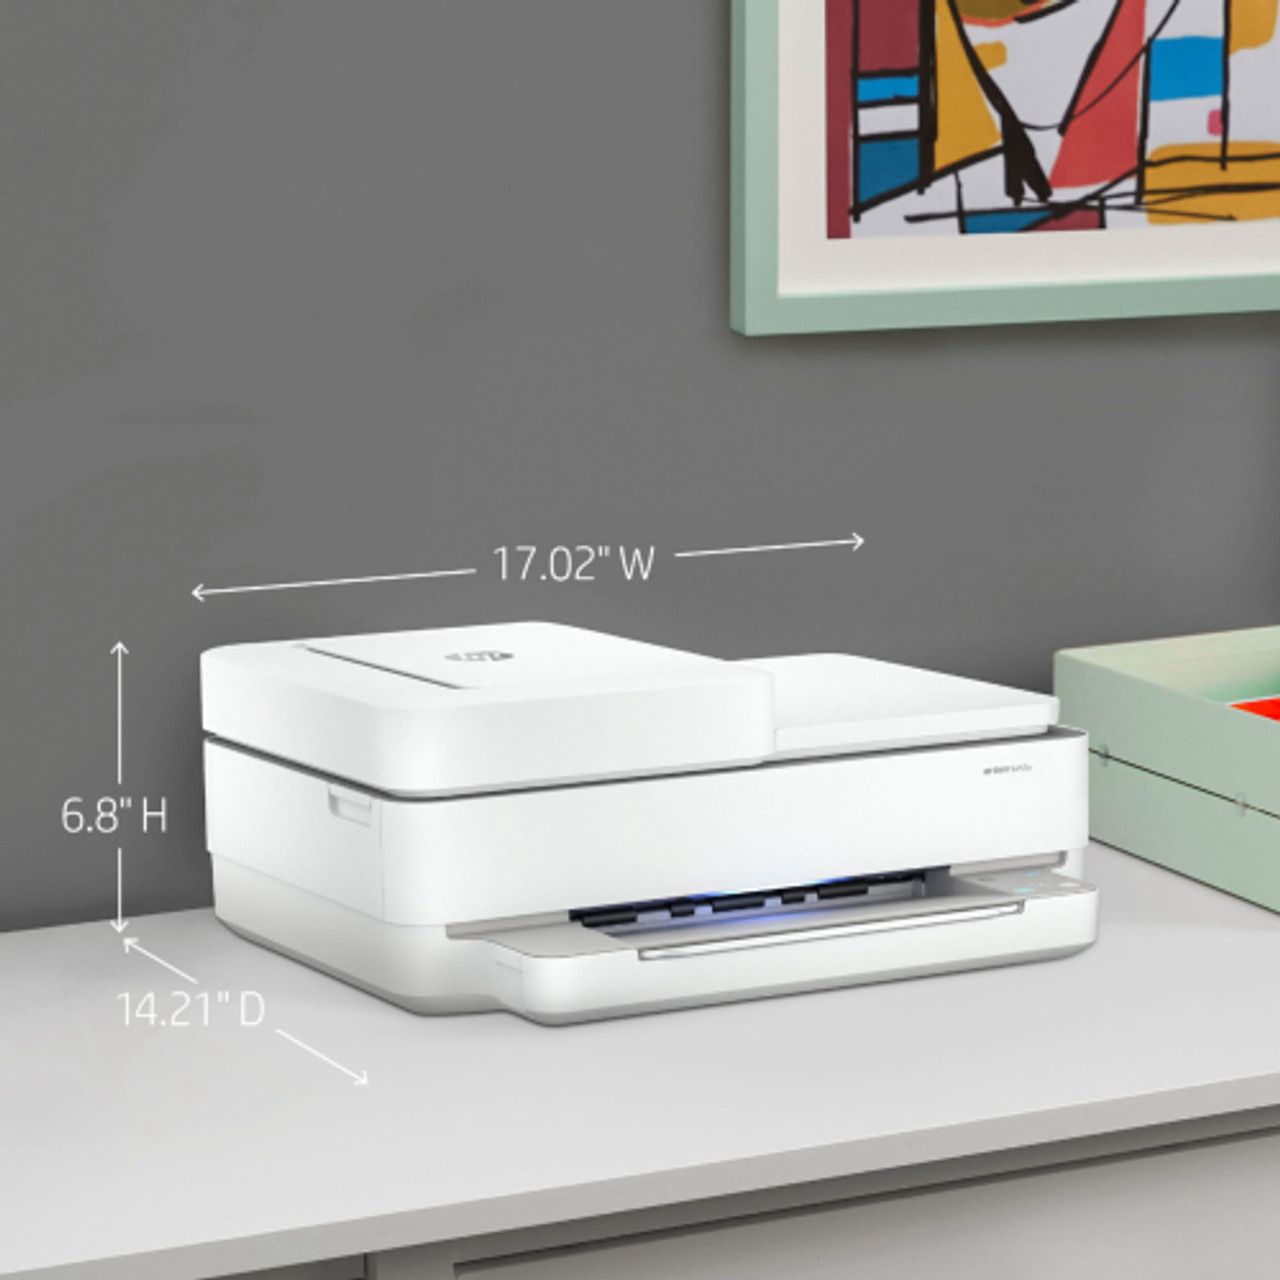 HP - ENVY 6455e Wireless All-In-One Inkjet Printer with 6 months of Instant Ink Included with HP+ - White